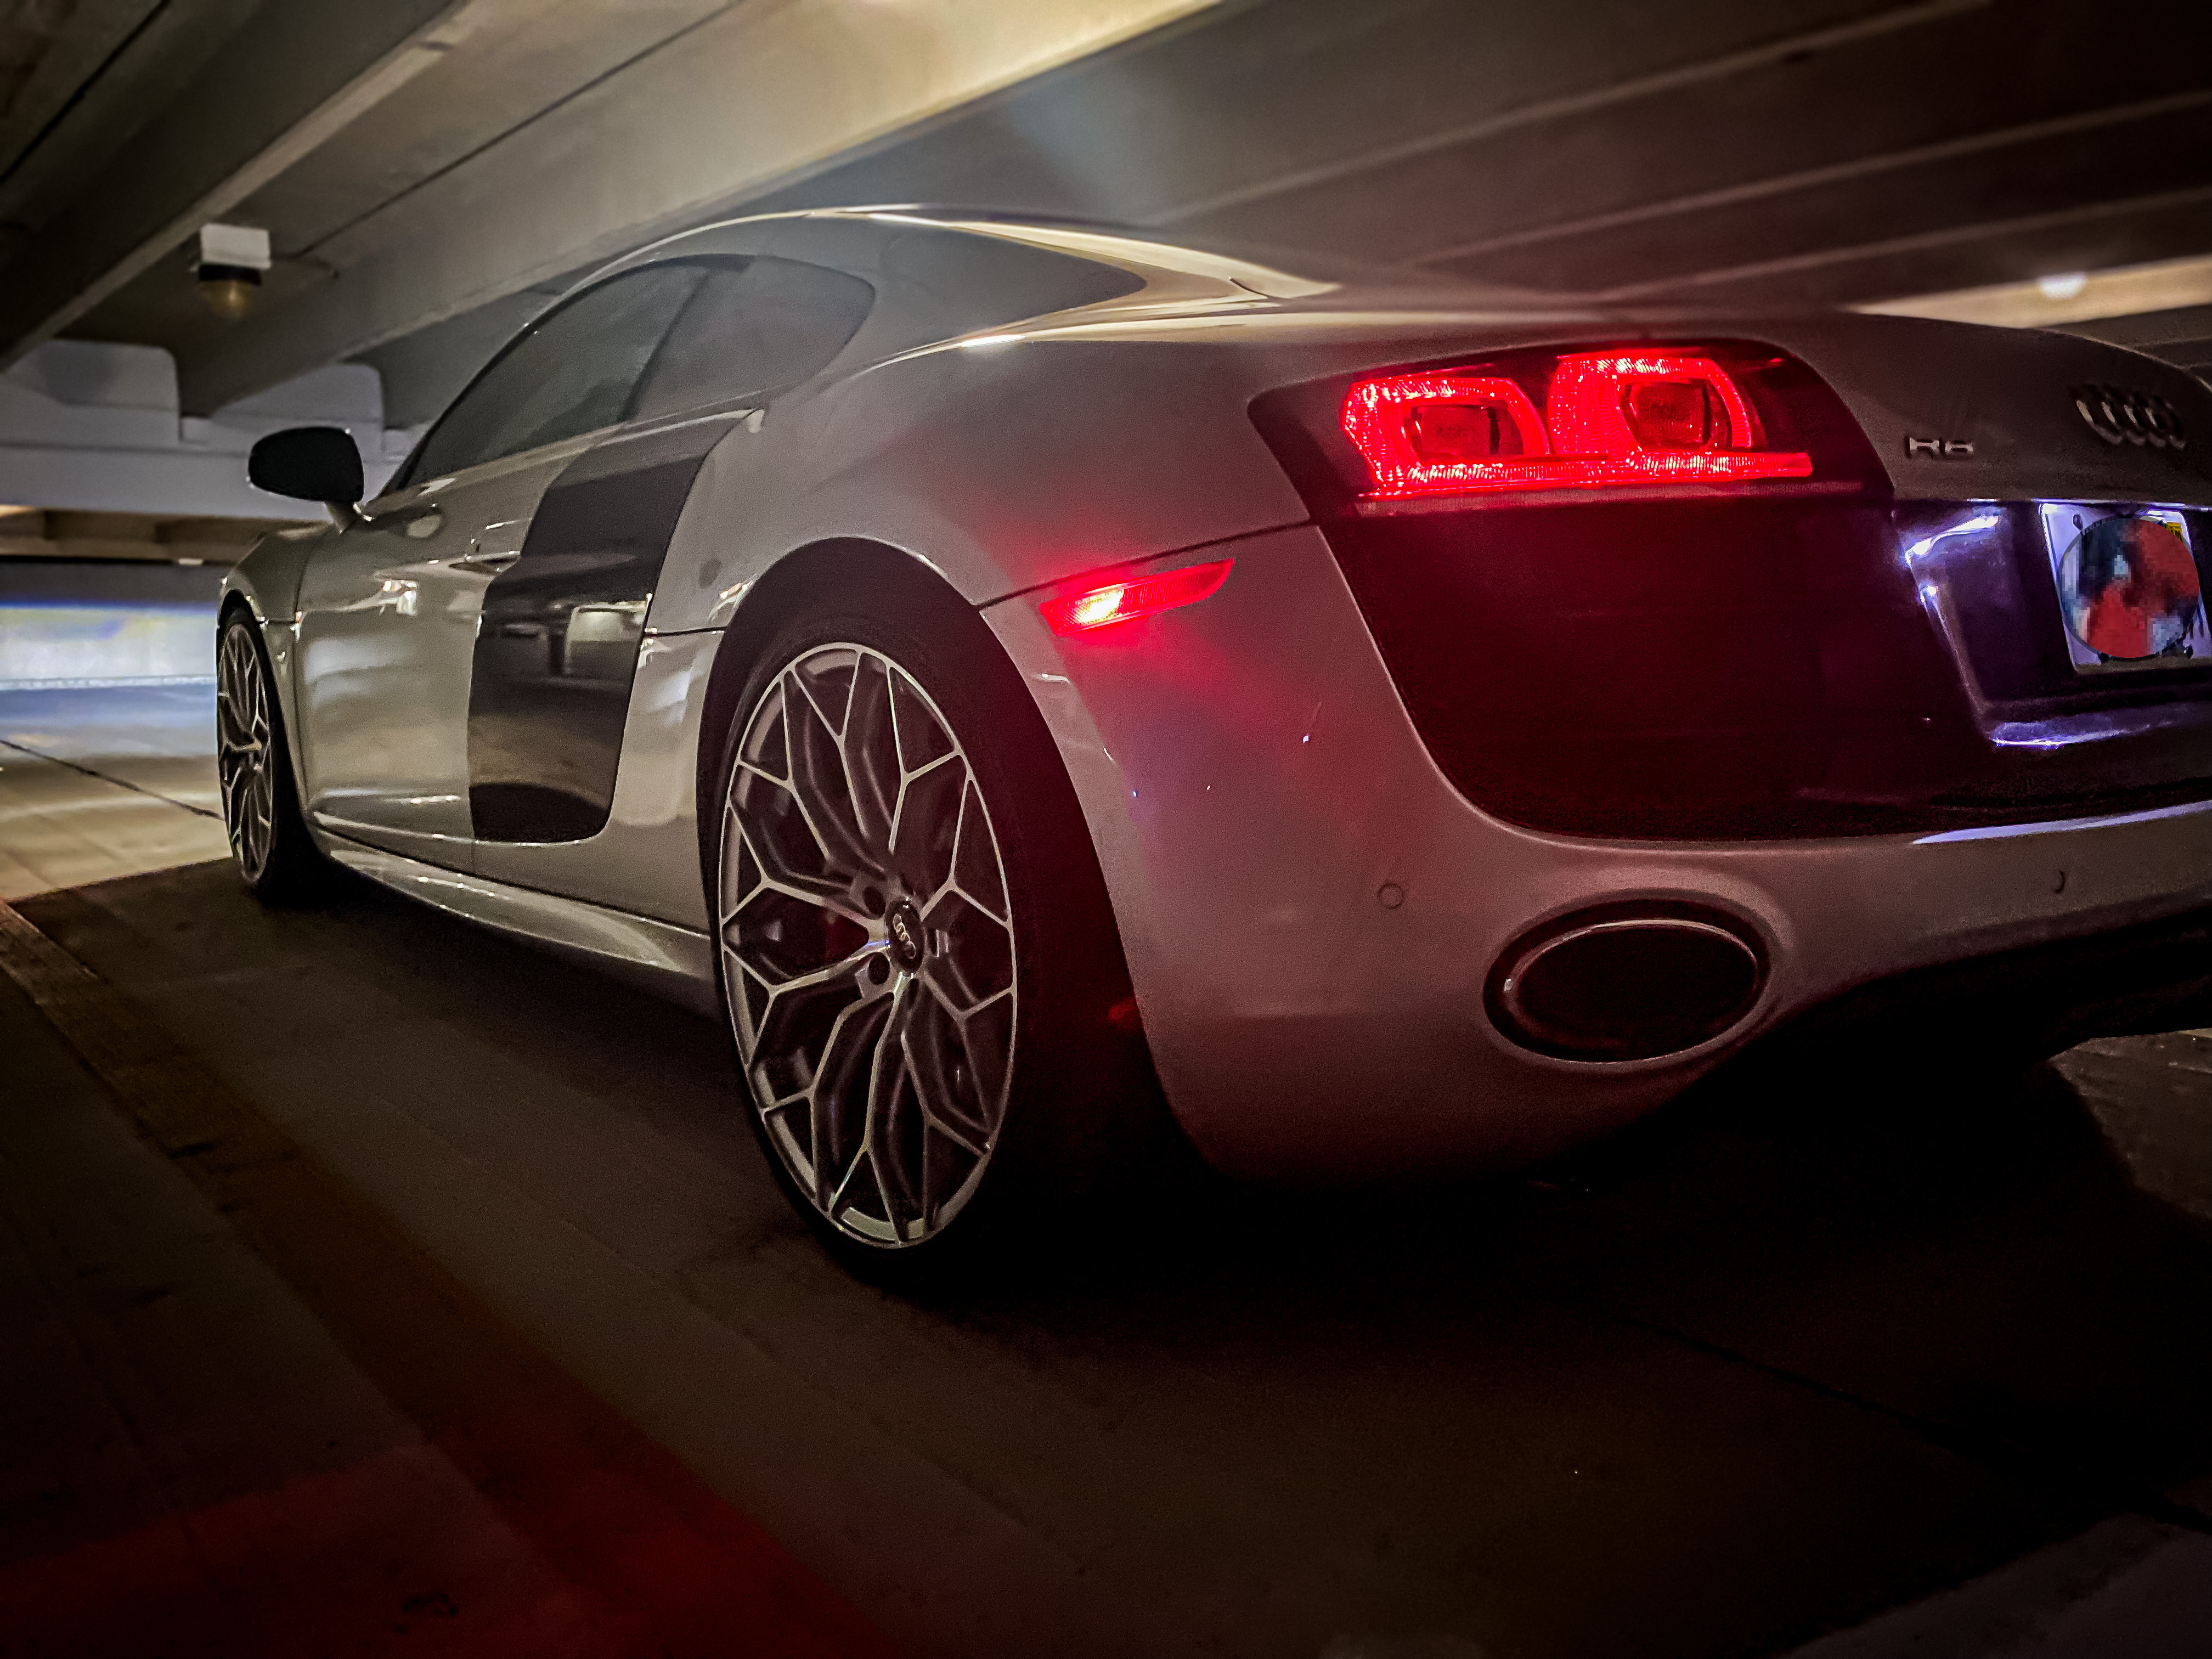 Rear driver side view of Audi R8 in a parking garage